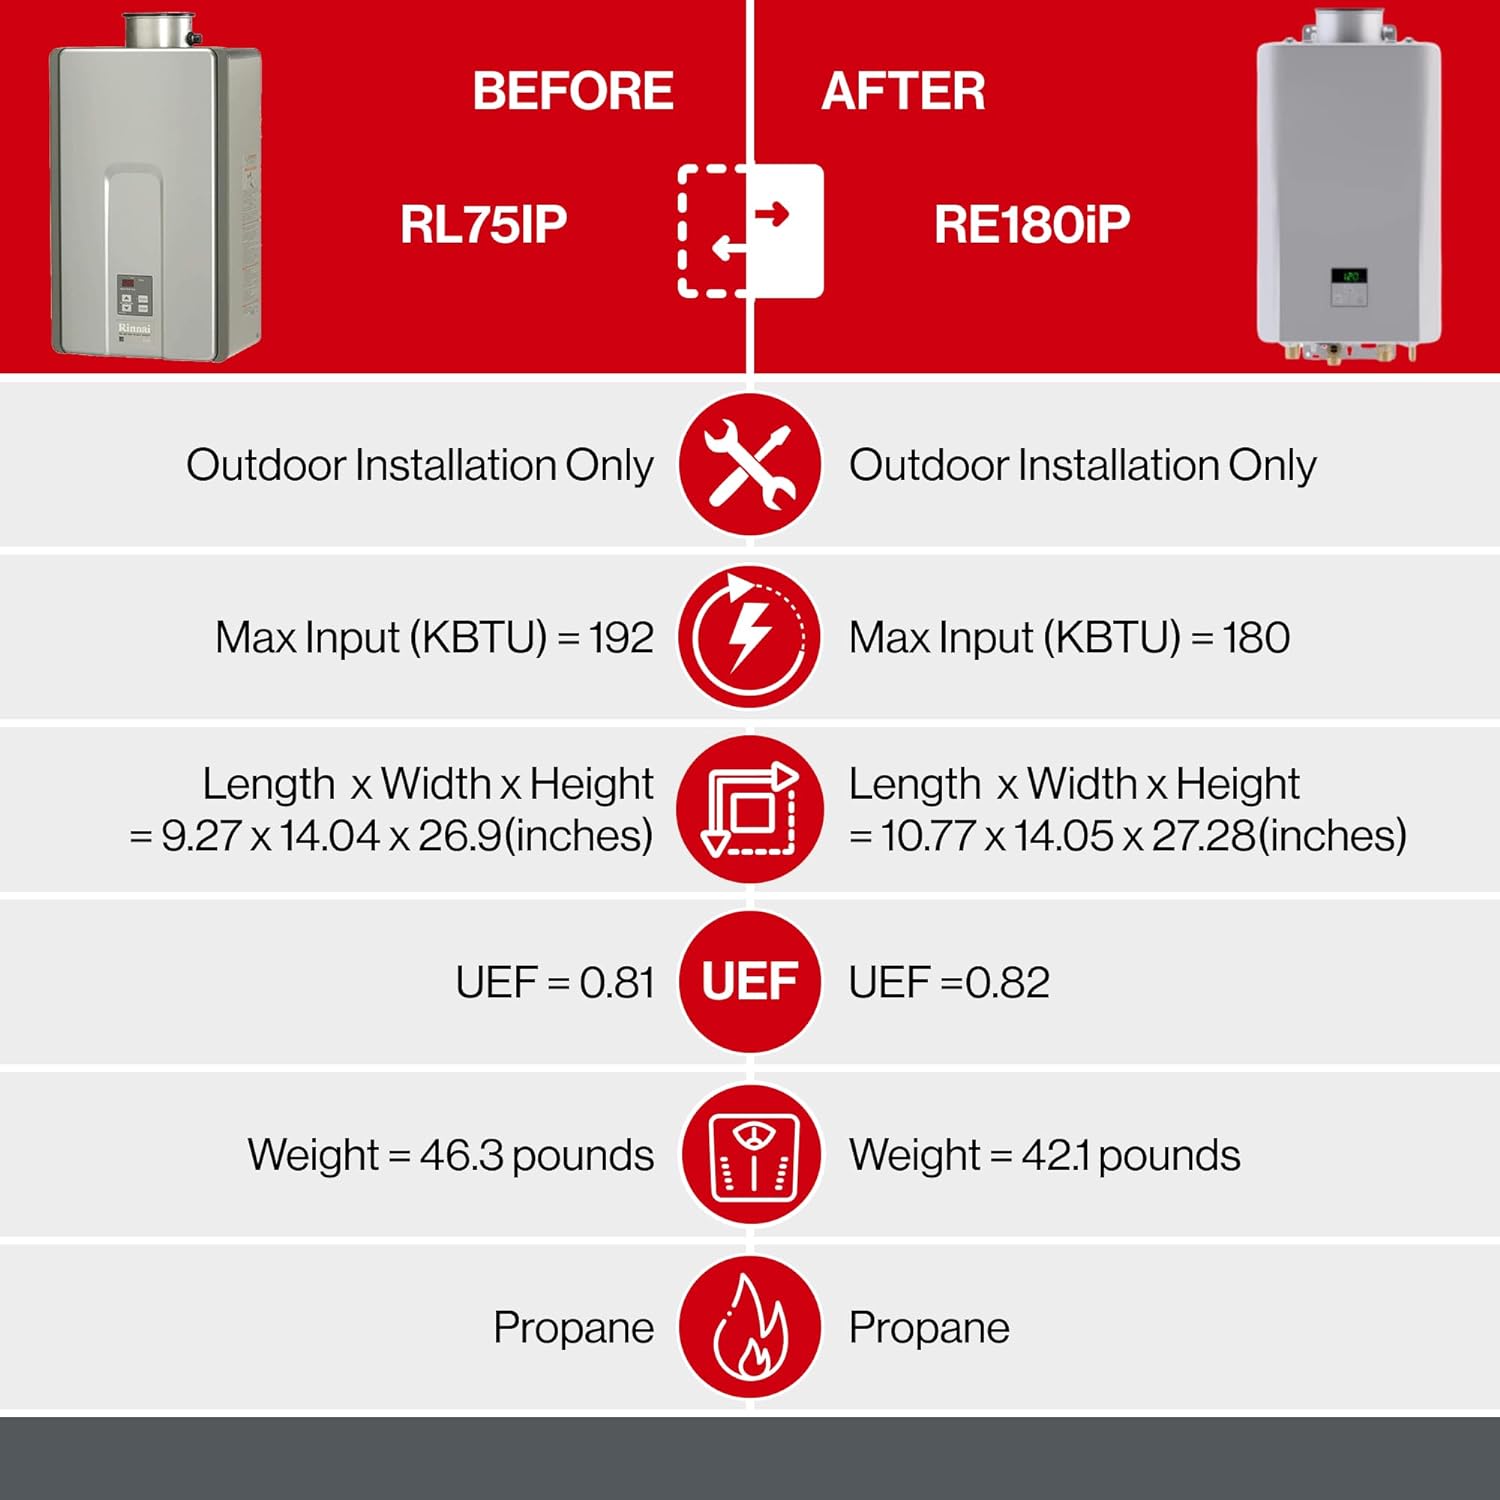 Rinnai RL94IN Tankless Hot Water Heater, 9.8 GPM, Natural Gas, Indoor Installation - Rinnai RL94IN Tankless Hot Water Heater Review